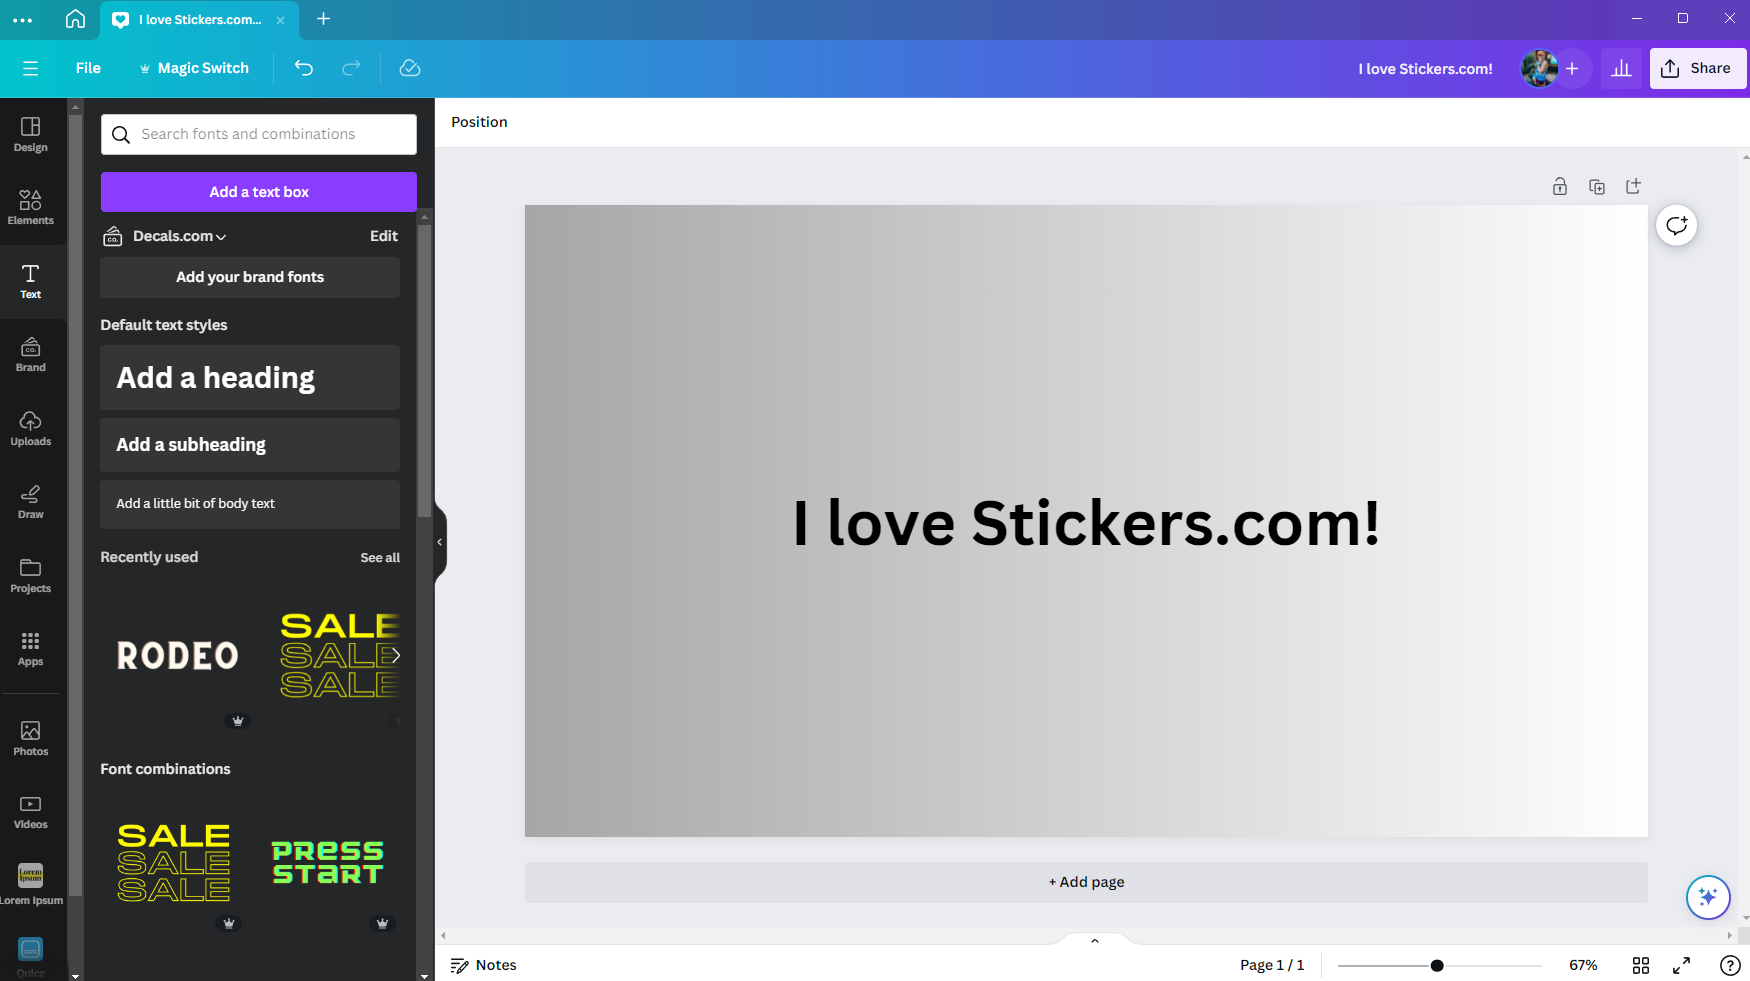 Adding text boxes in Canva | Stickers.com